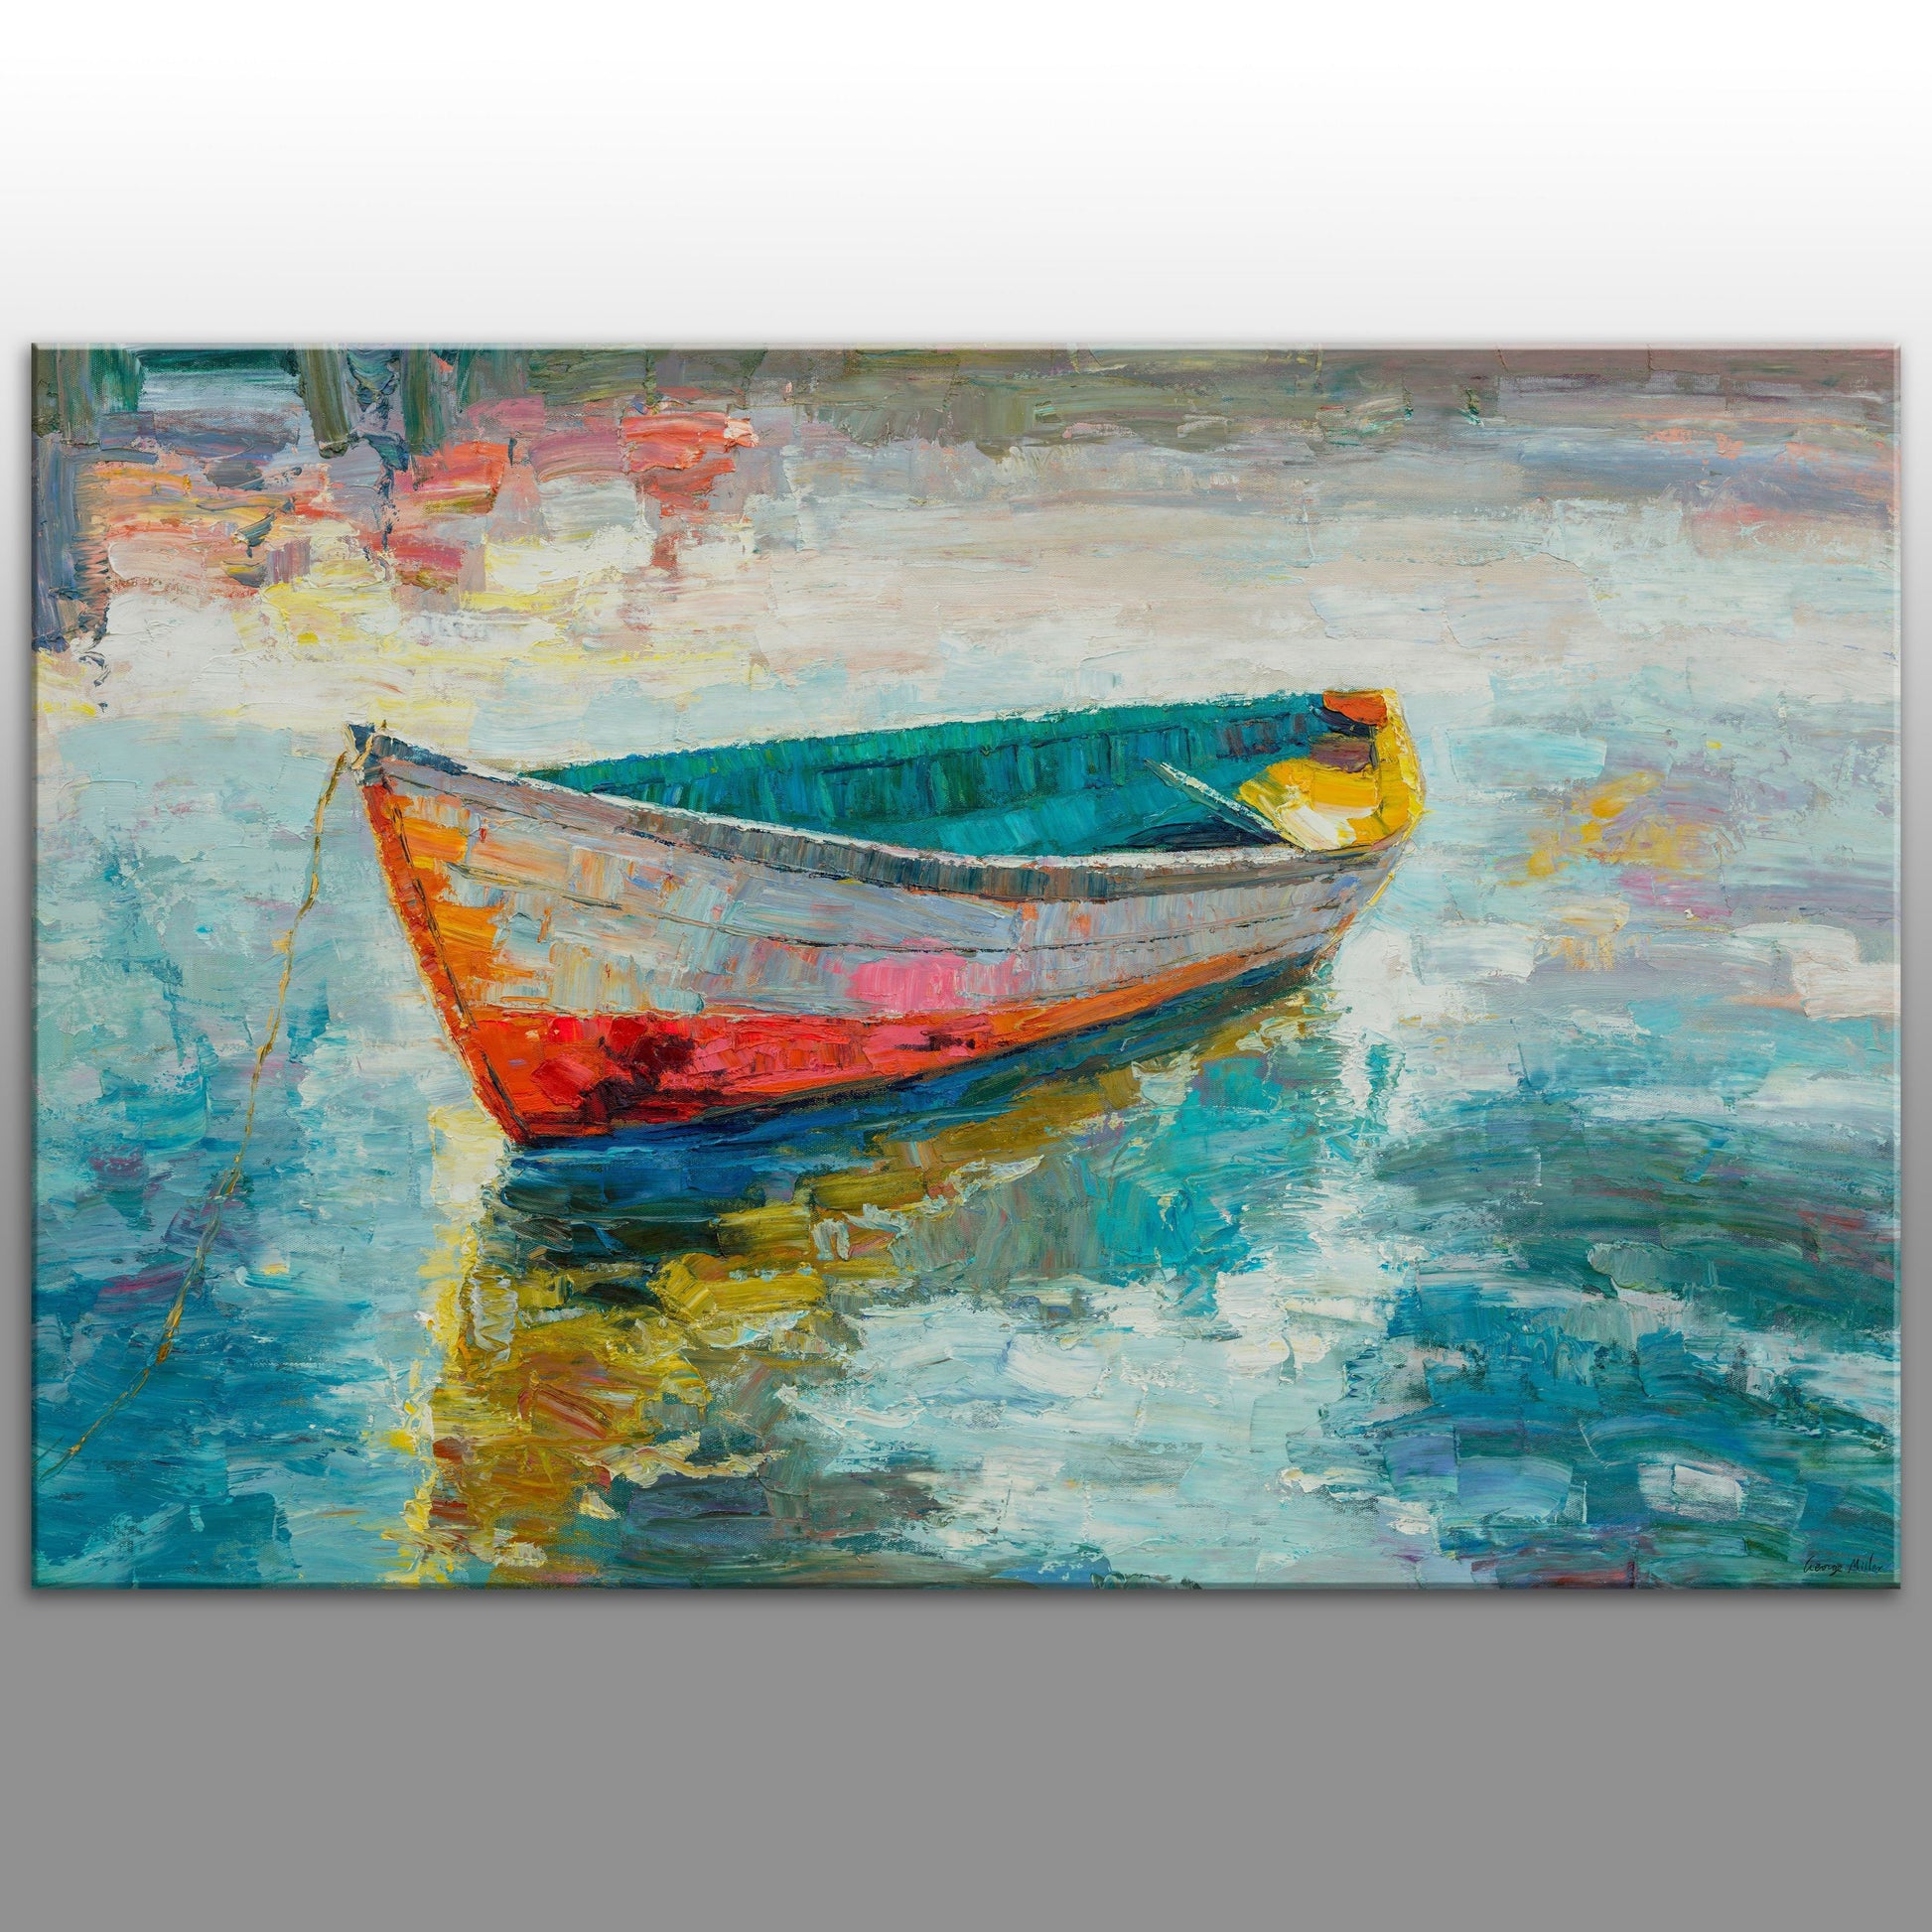 Seascape Oil Painting: Fishing Boat